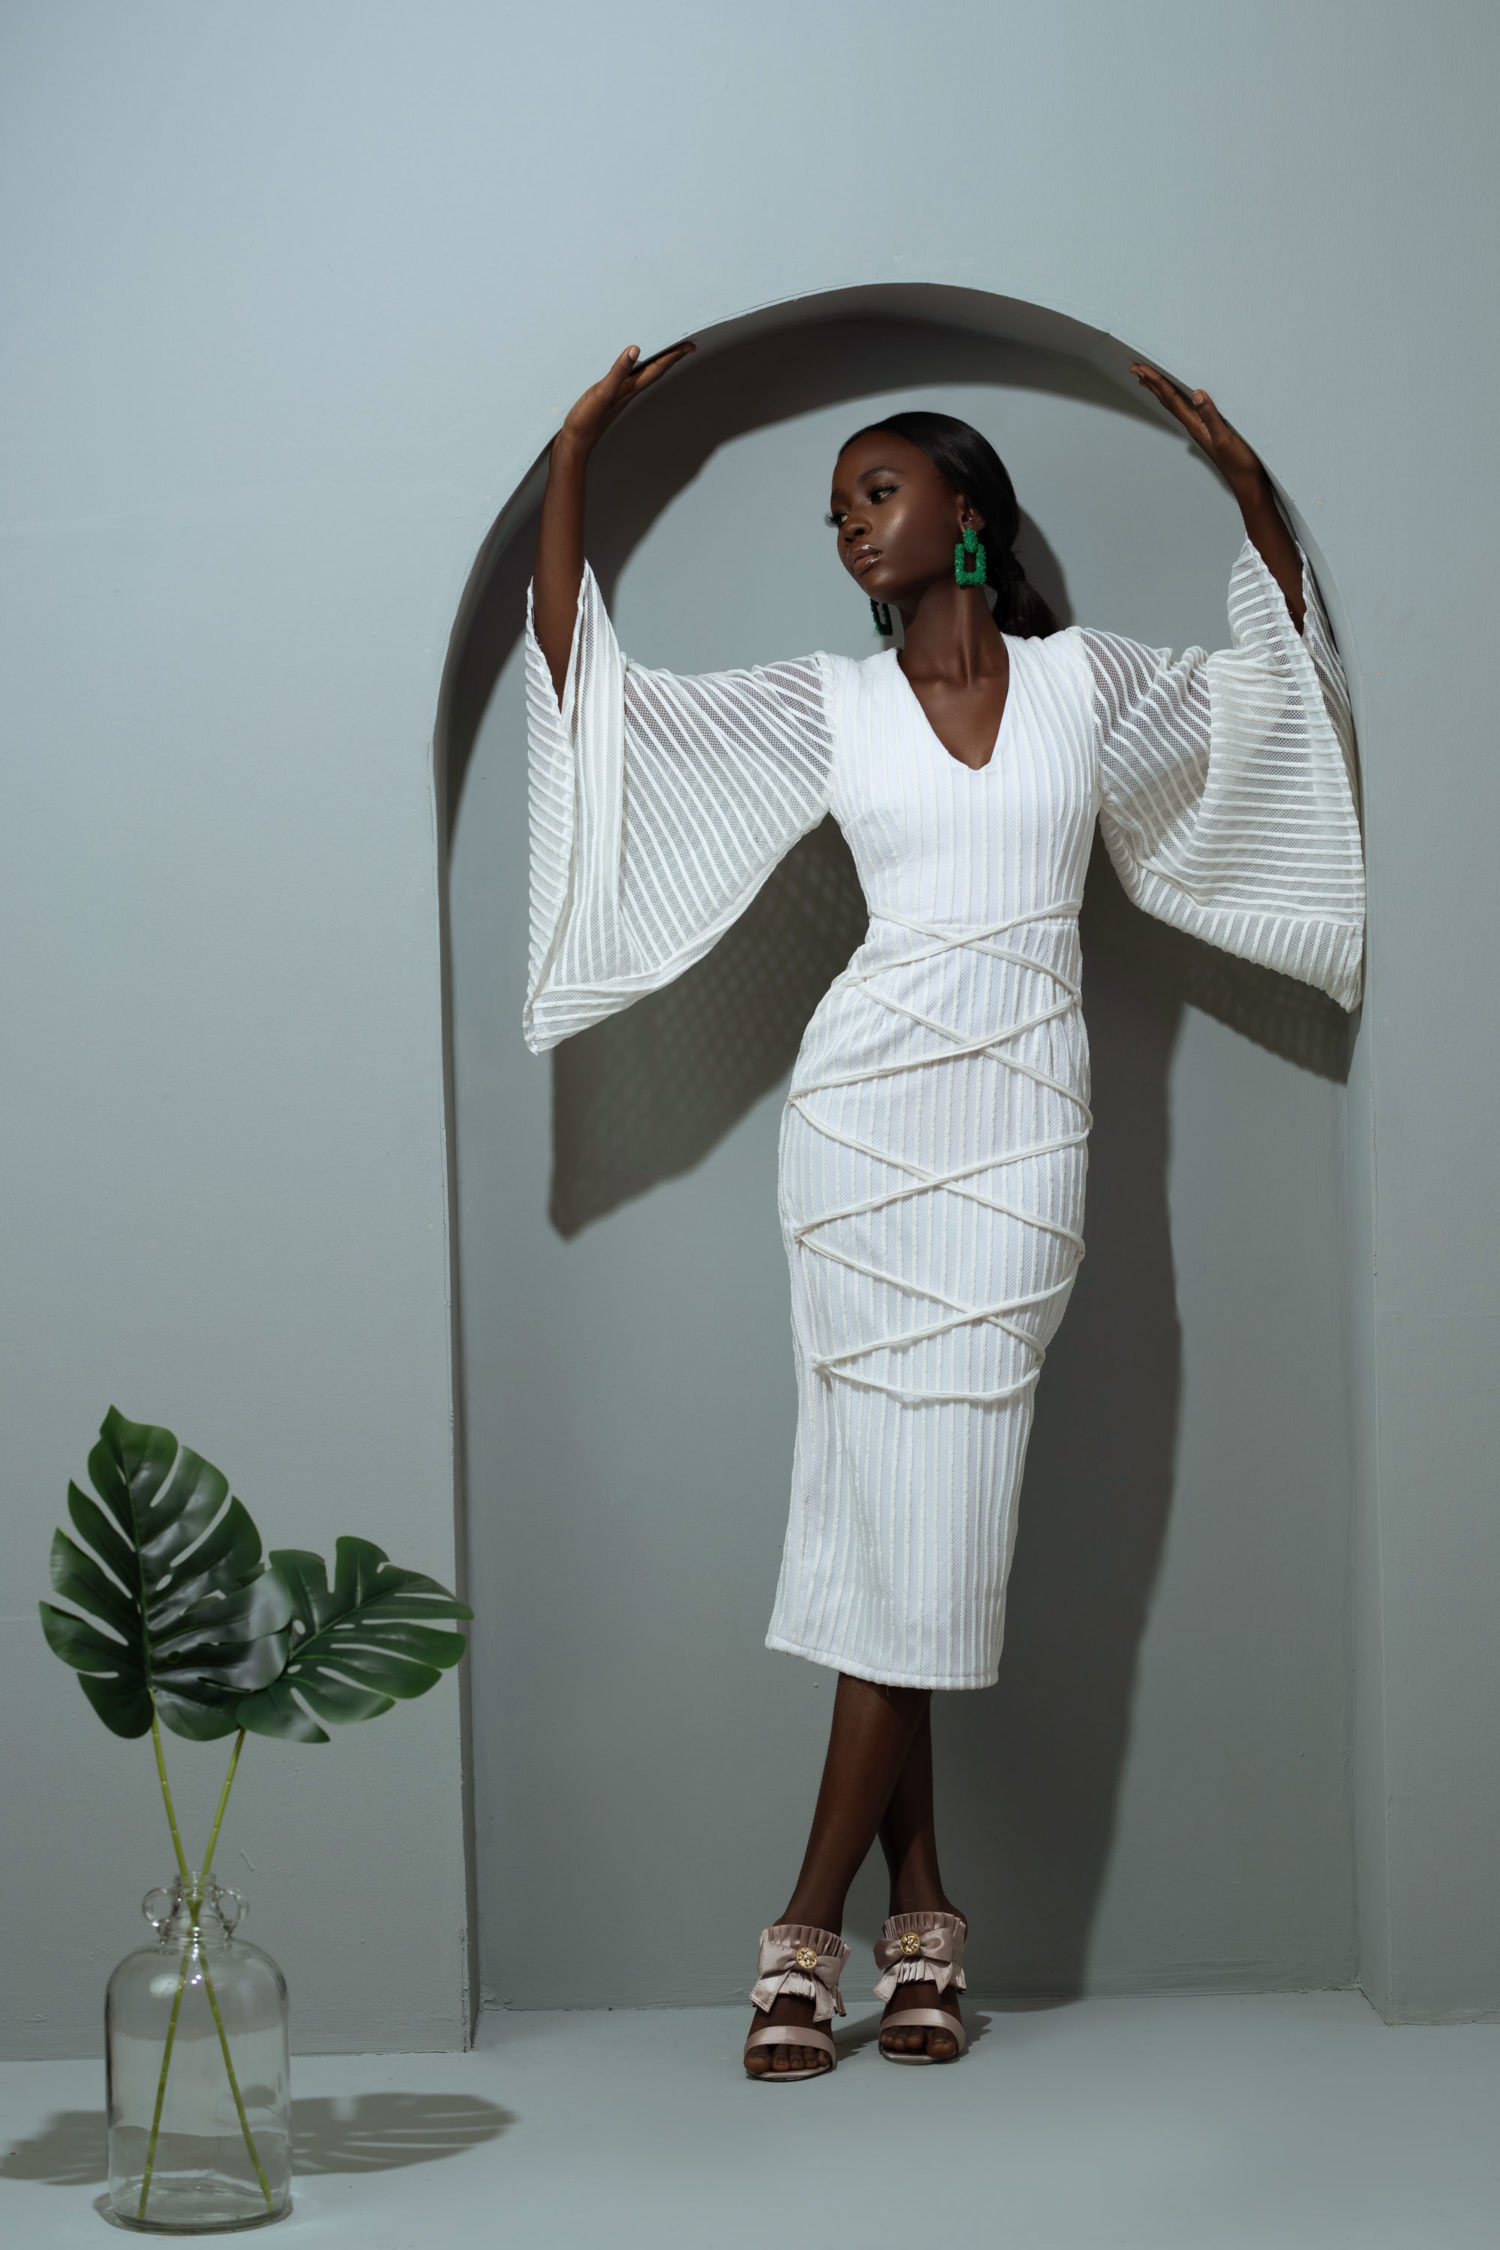 Prepare To Completely Obsess Over Knanfe’s New Collection “Beatnik”